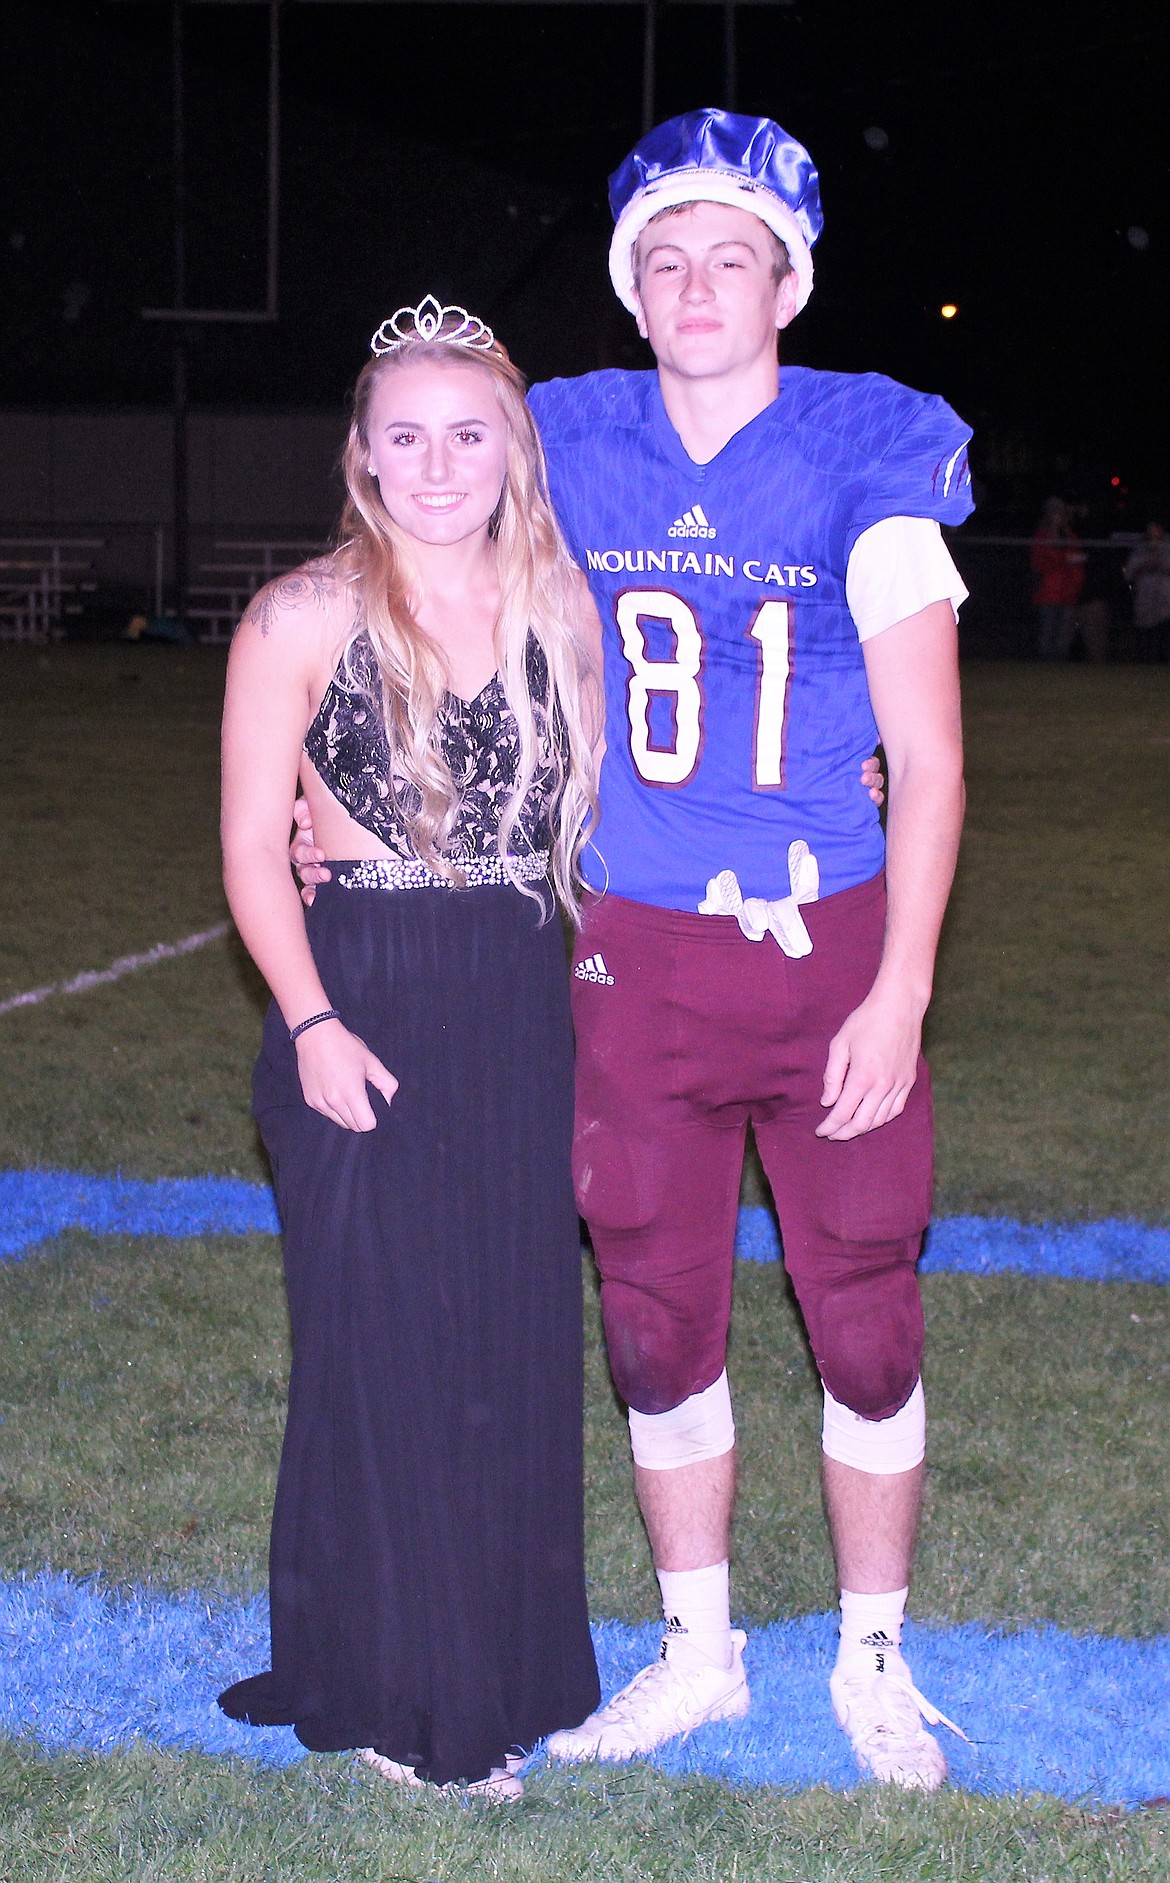 Homecoming royalty: Queen Margaret Parkin and King Connor Voll. (Photo by Frankie Kelly)